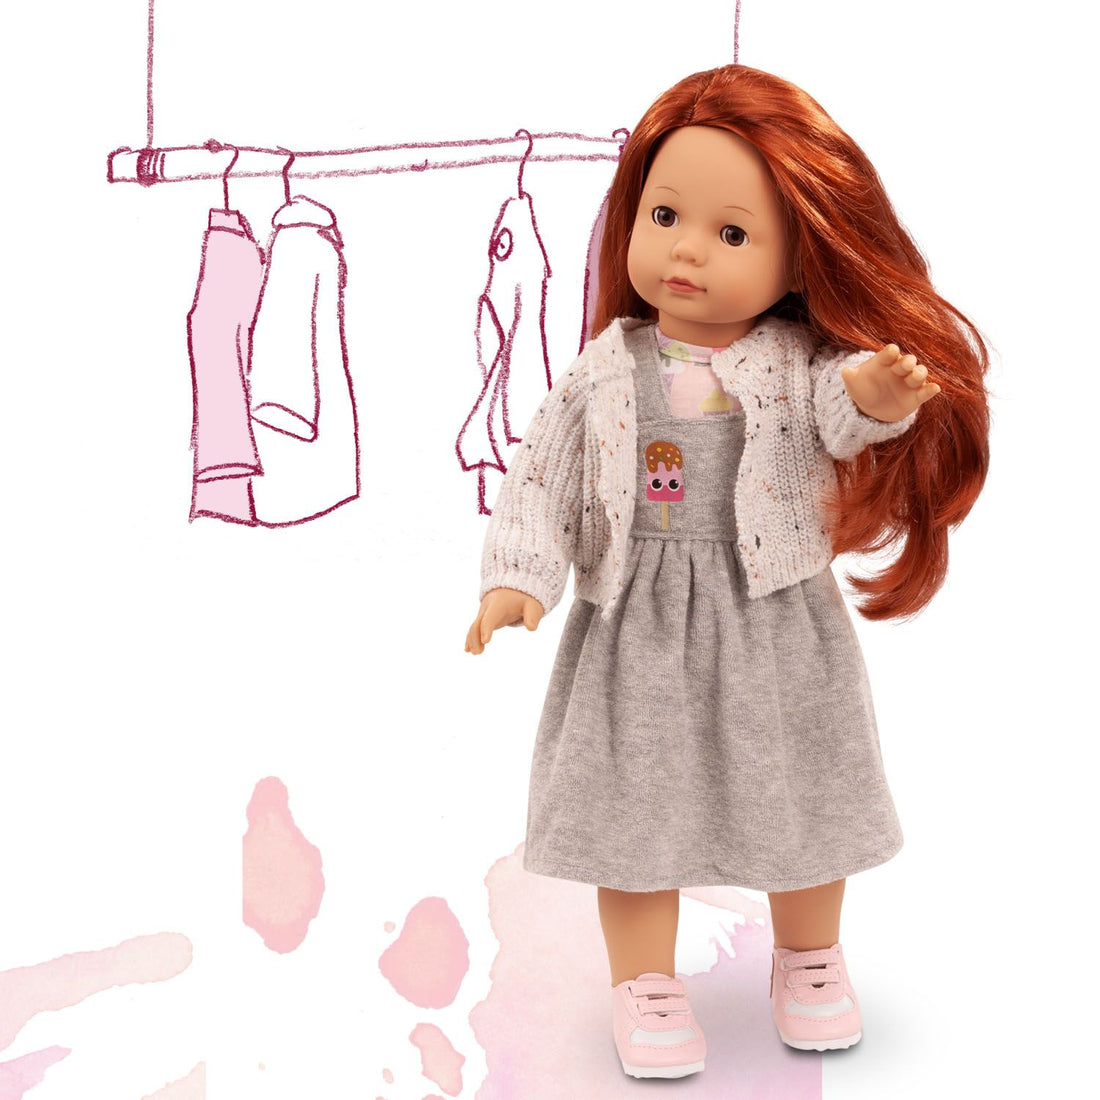 Julia Popsicle - Dolls and Accessories